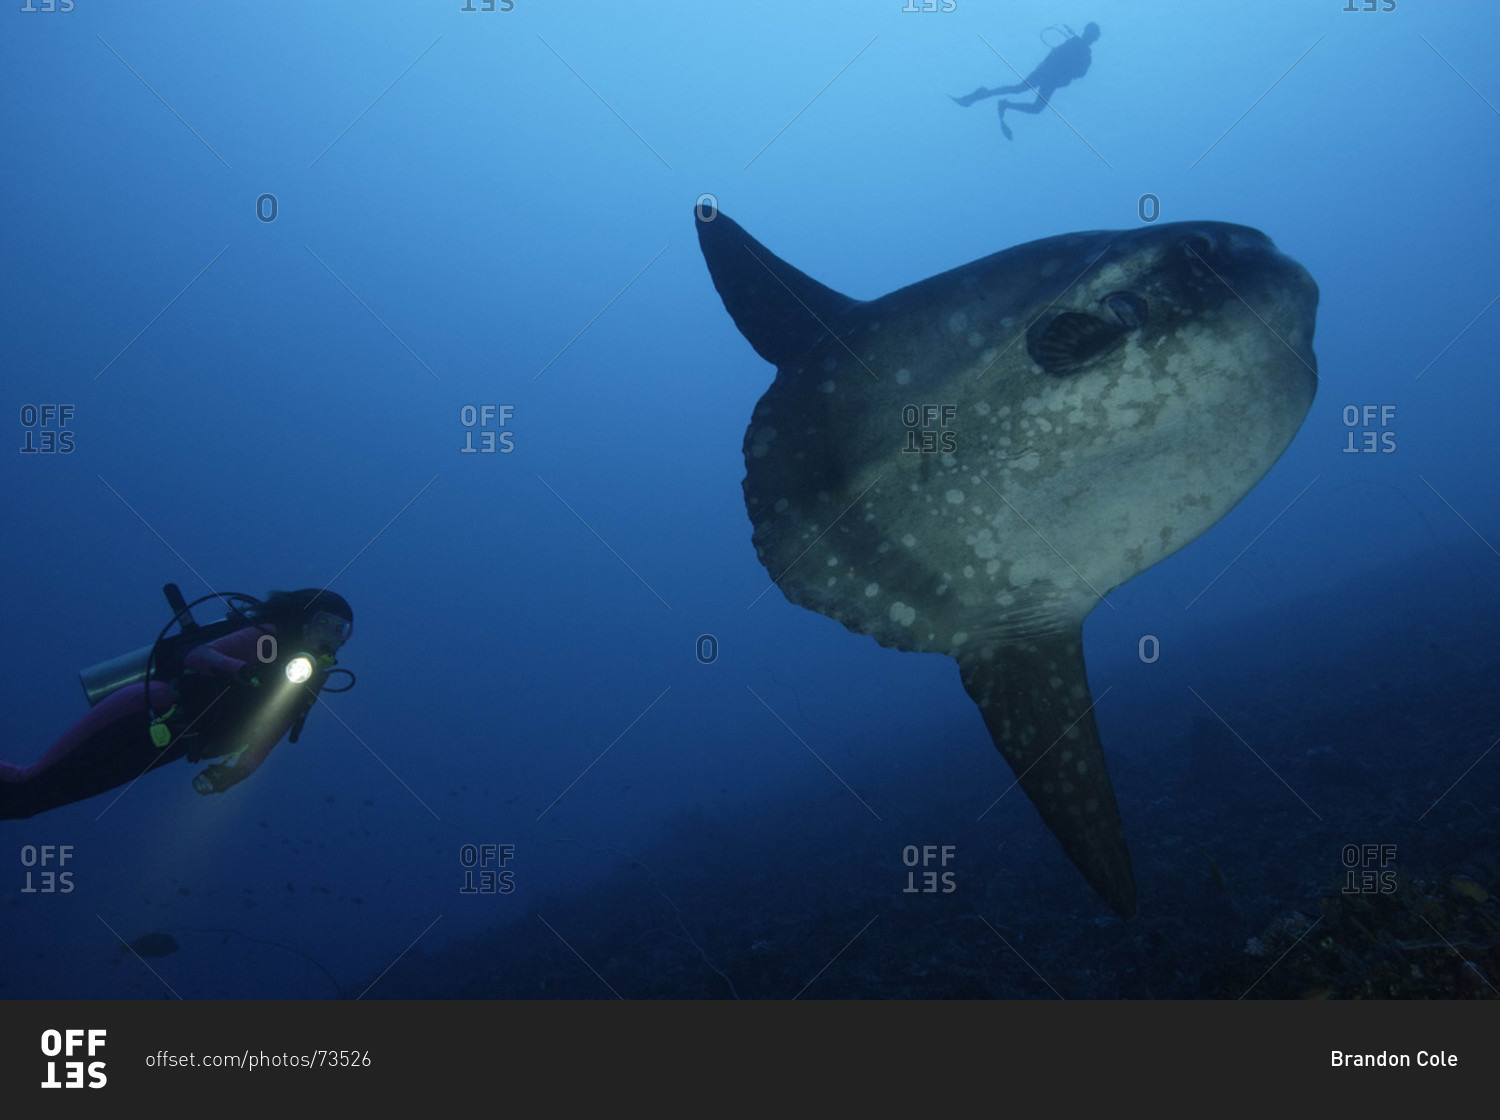 Ocean Sunfish and scuba diver in tropical waters